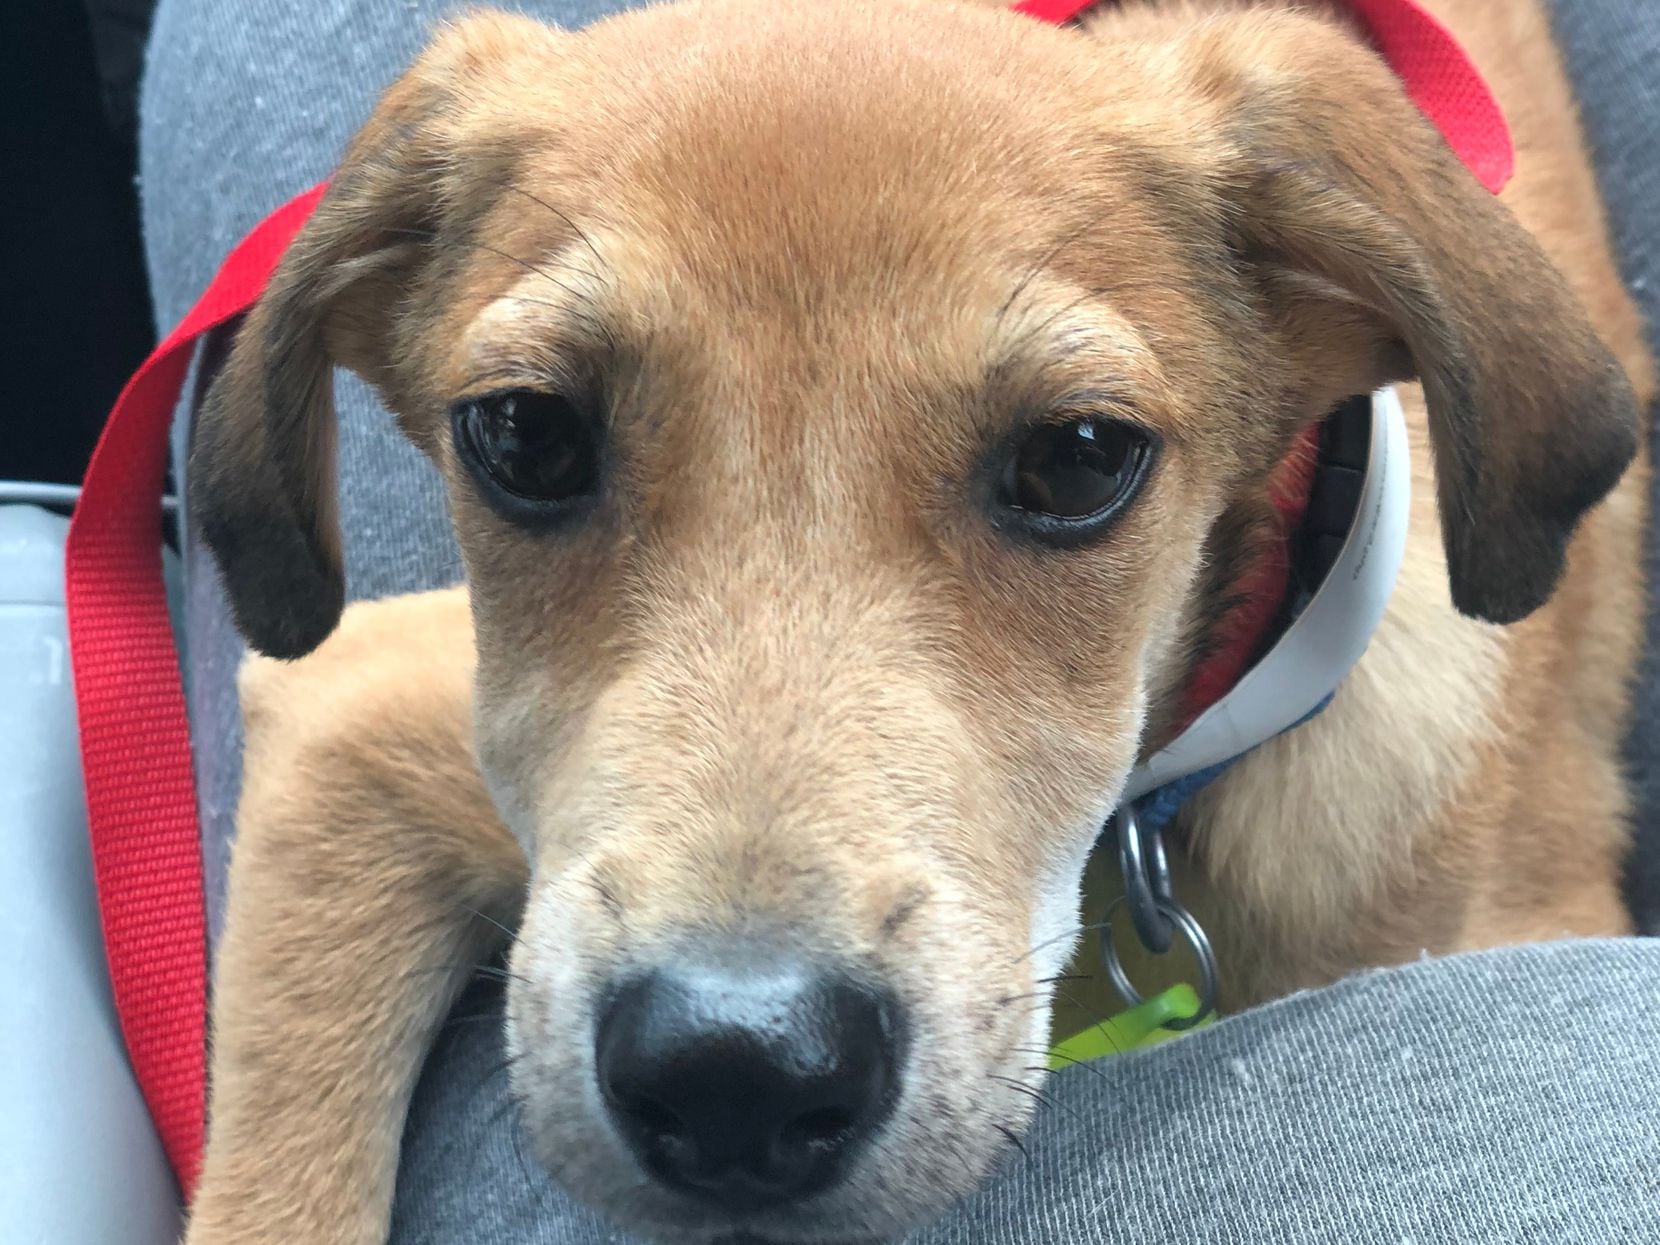 Hobie the puppy, just after his adoption by Audrey and Mike Schott.  Rescuers found him abandoned around 3 months old on a road in Kentucky.